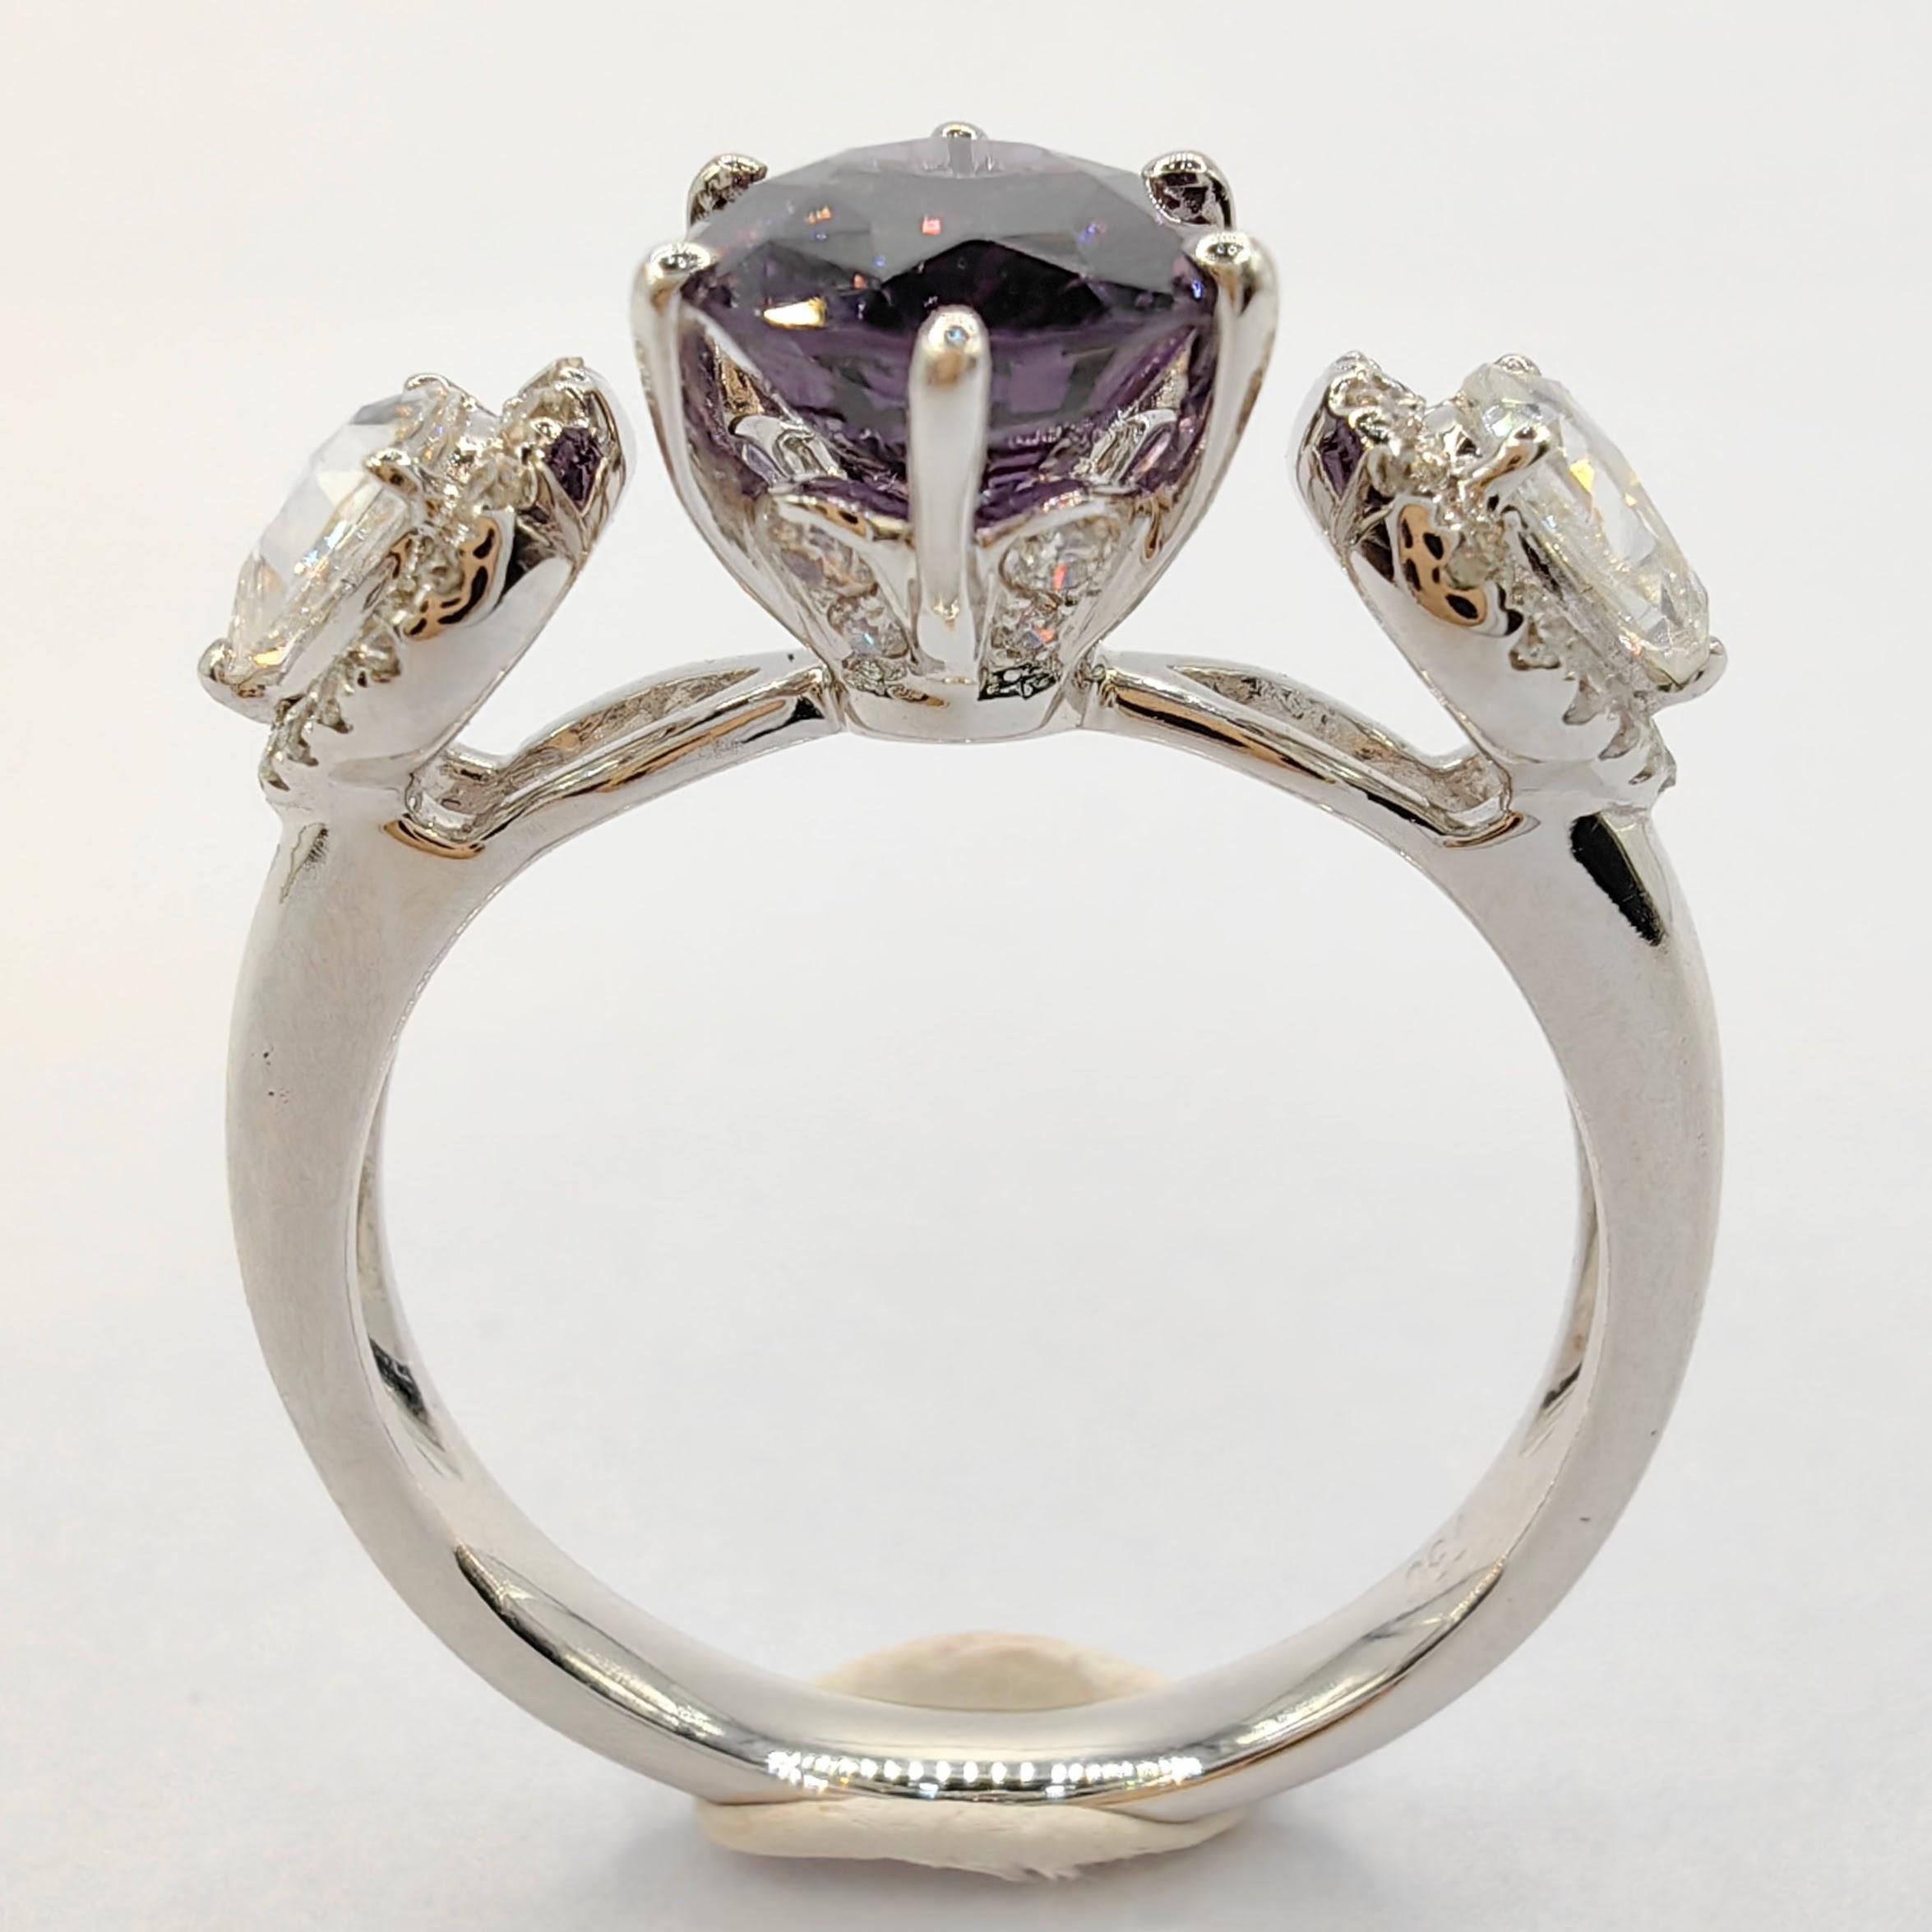 Introducing our exquisite 1.19 Carat Oval Cut Purple Spinel Rose Cut Halo Diamond Ring in 18K White Gold. This remarkable piece showcases a stunning purple spinel as the centerpiece, accompanied by a dazzling array of diamonds.

The main attraction